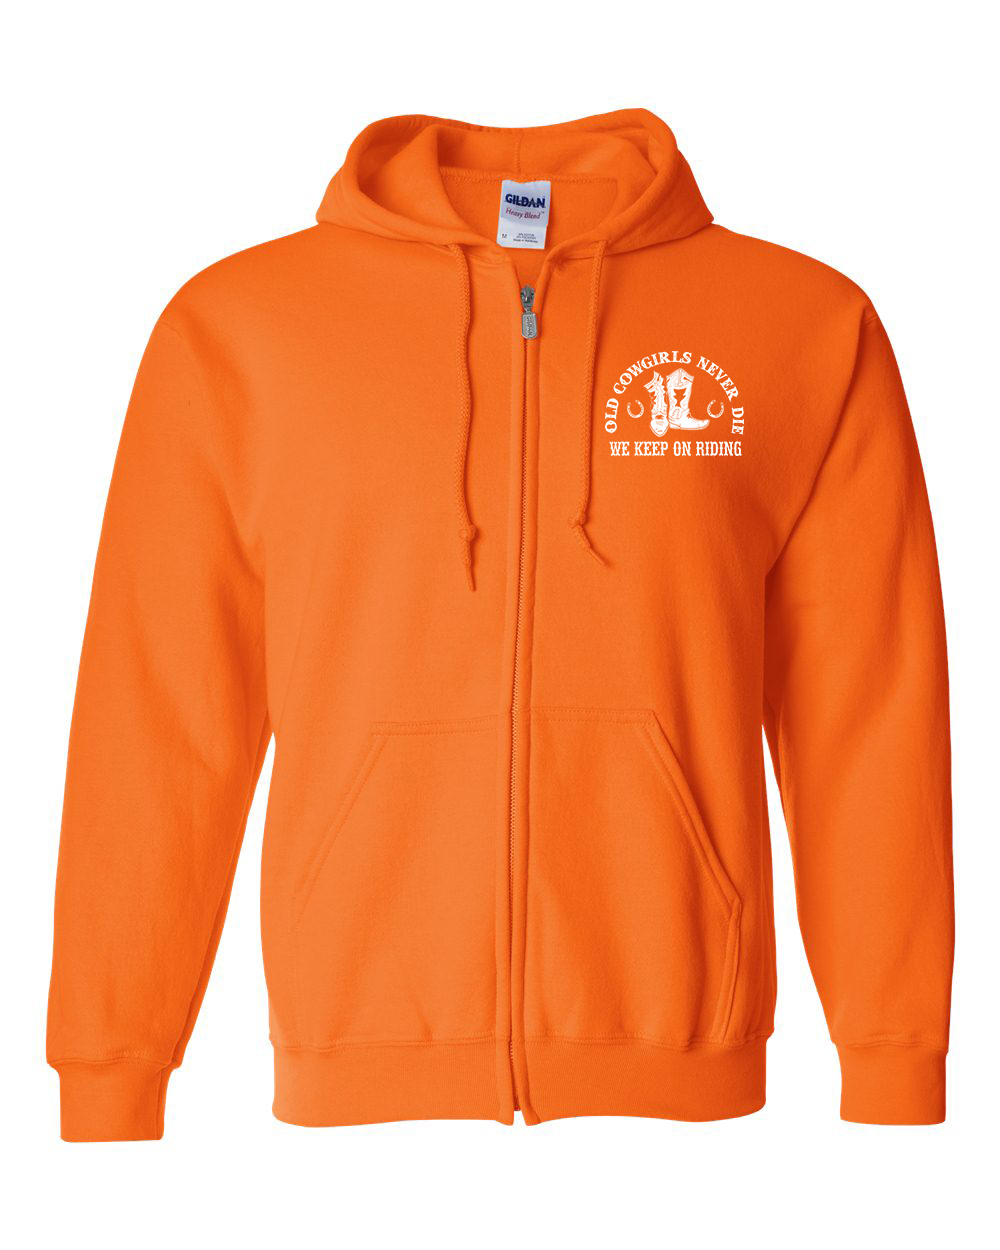 A bright orange zip up hoodie with the words " college of business " on it.